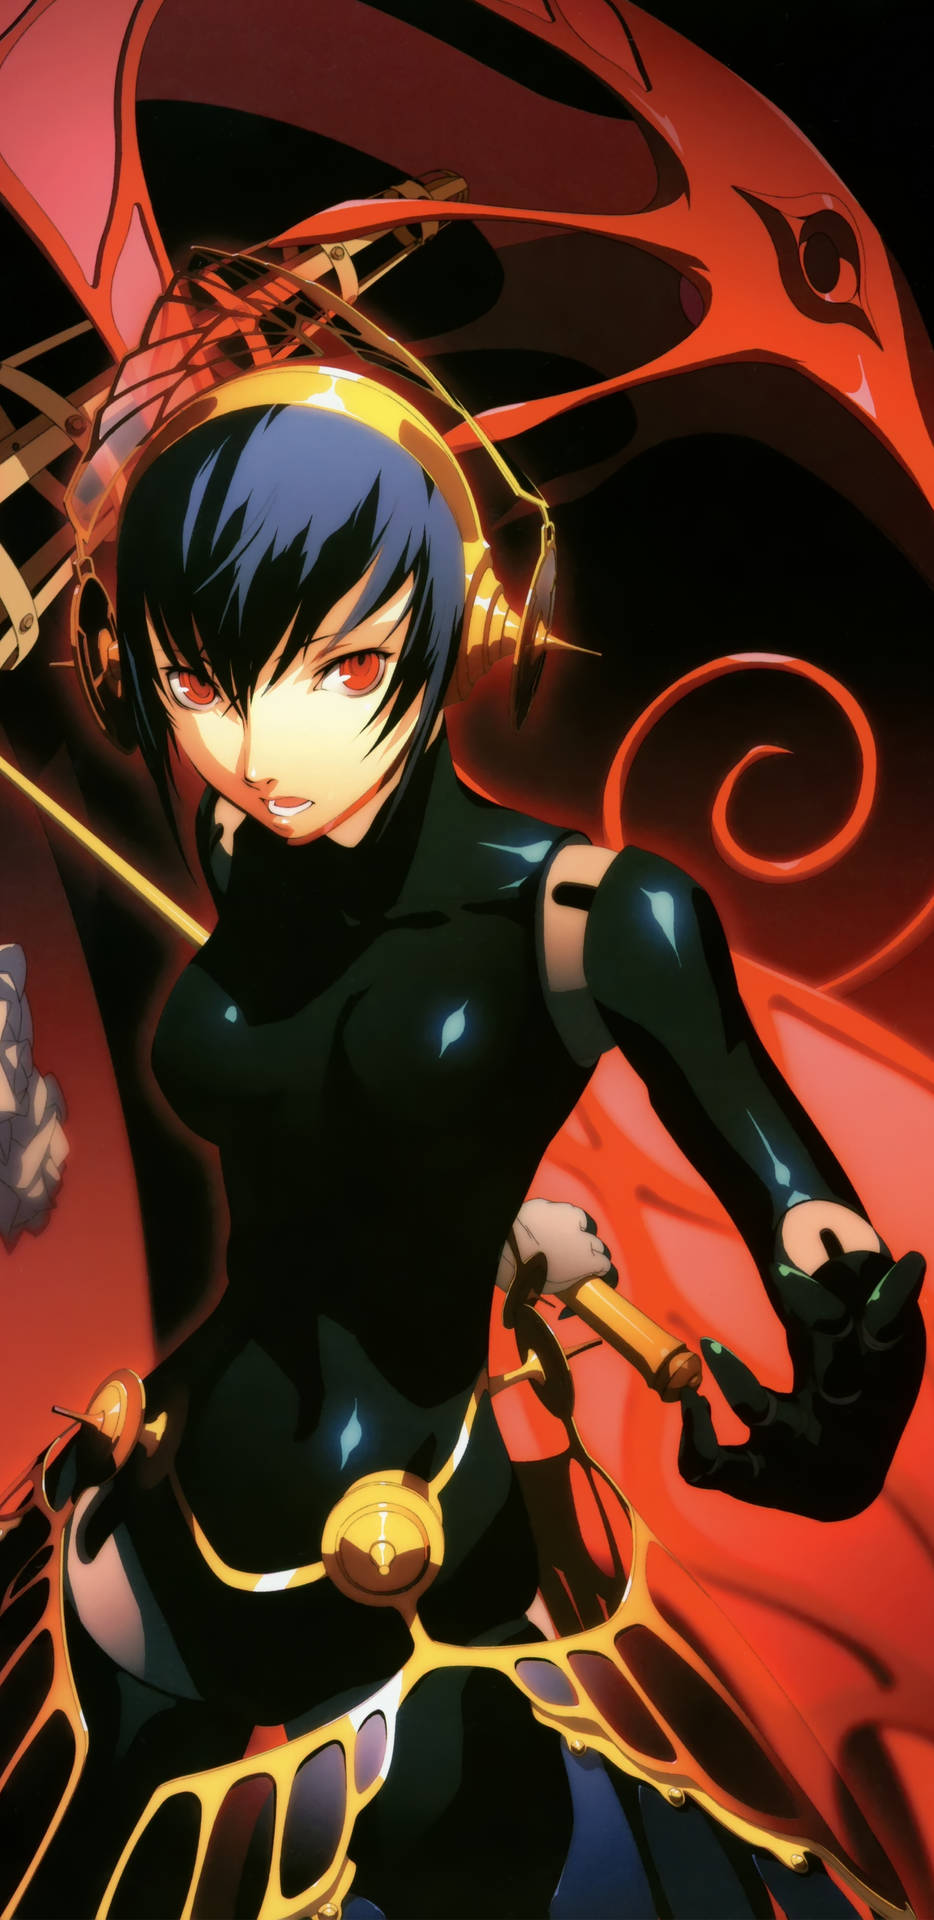 Metis Fes - The Ravishing Maiden from Persona 3 Wallpaper